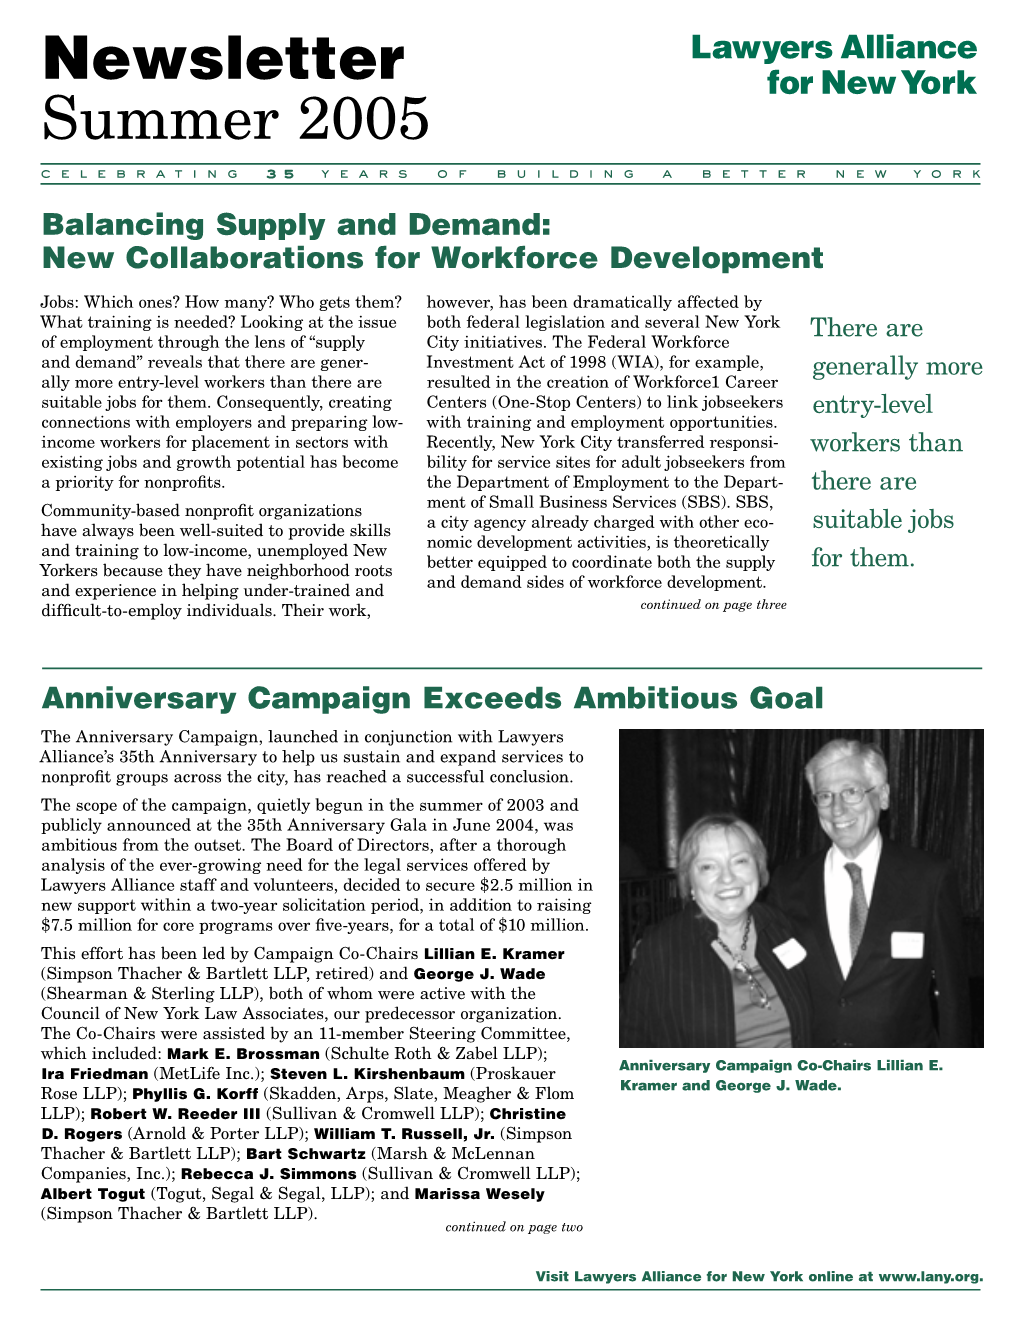 Summer 2005 Celebrating 3355 Years of Building a Better New York